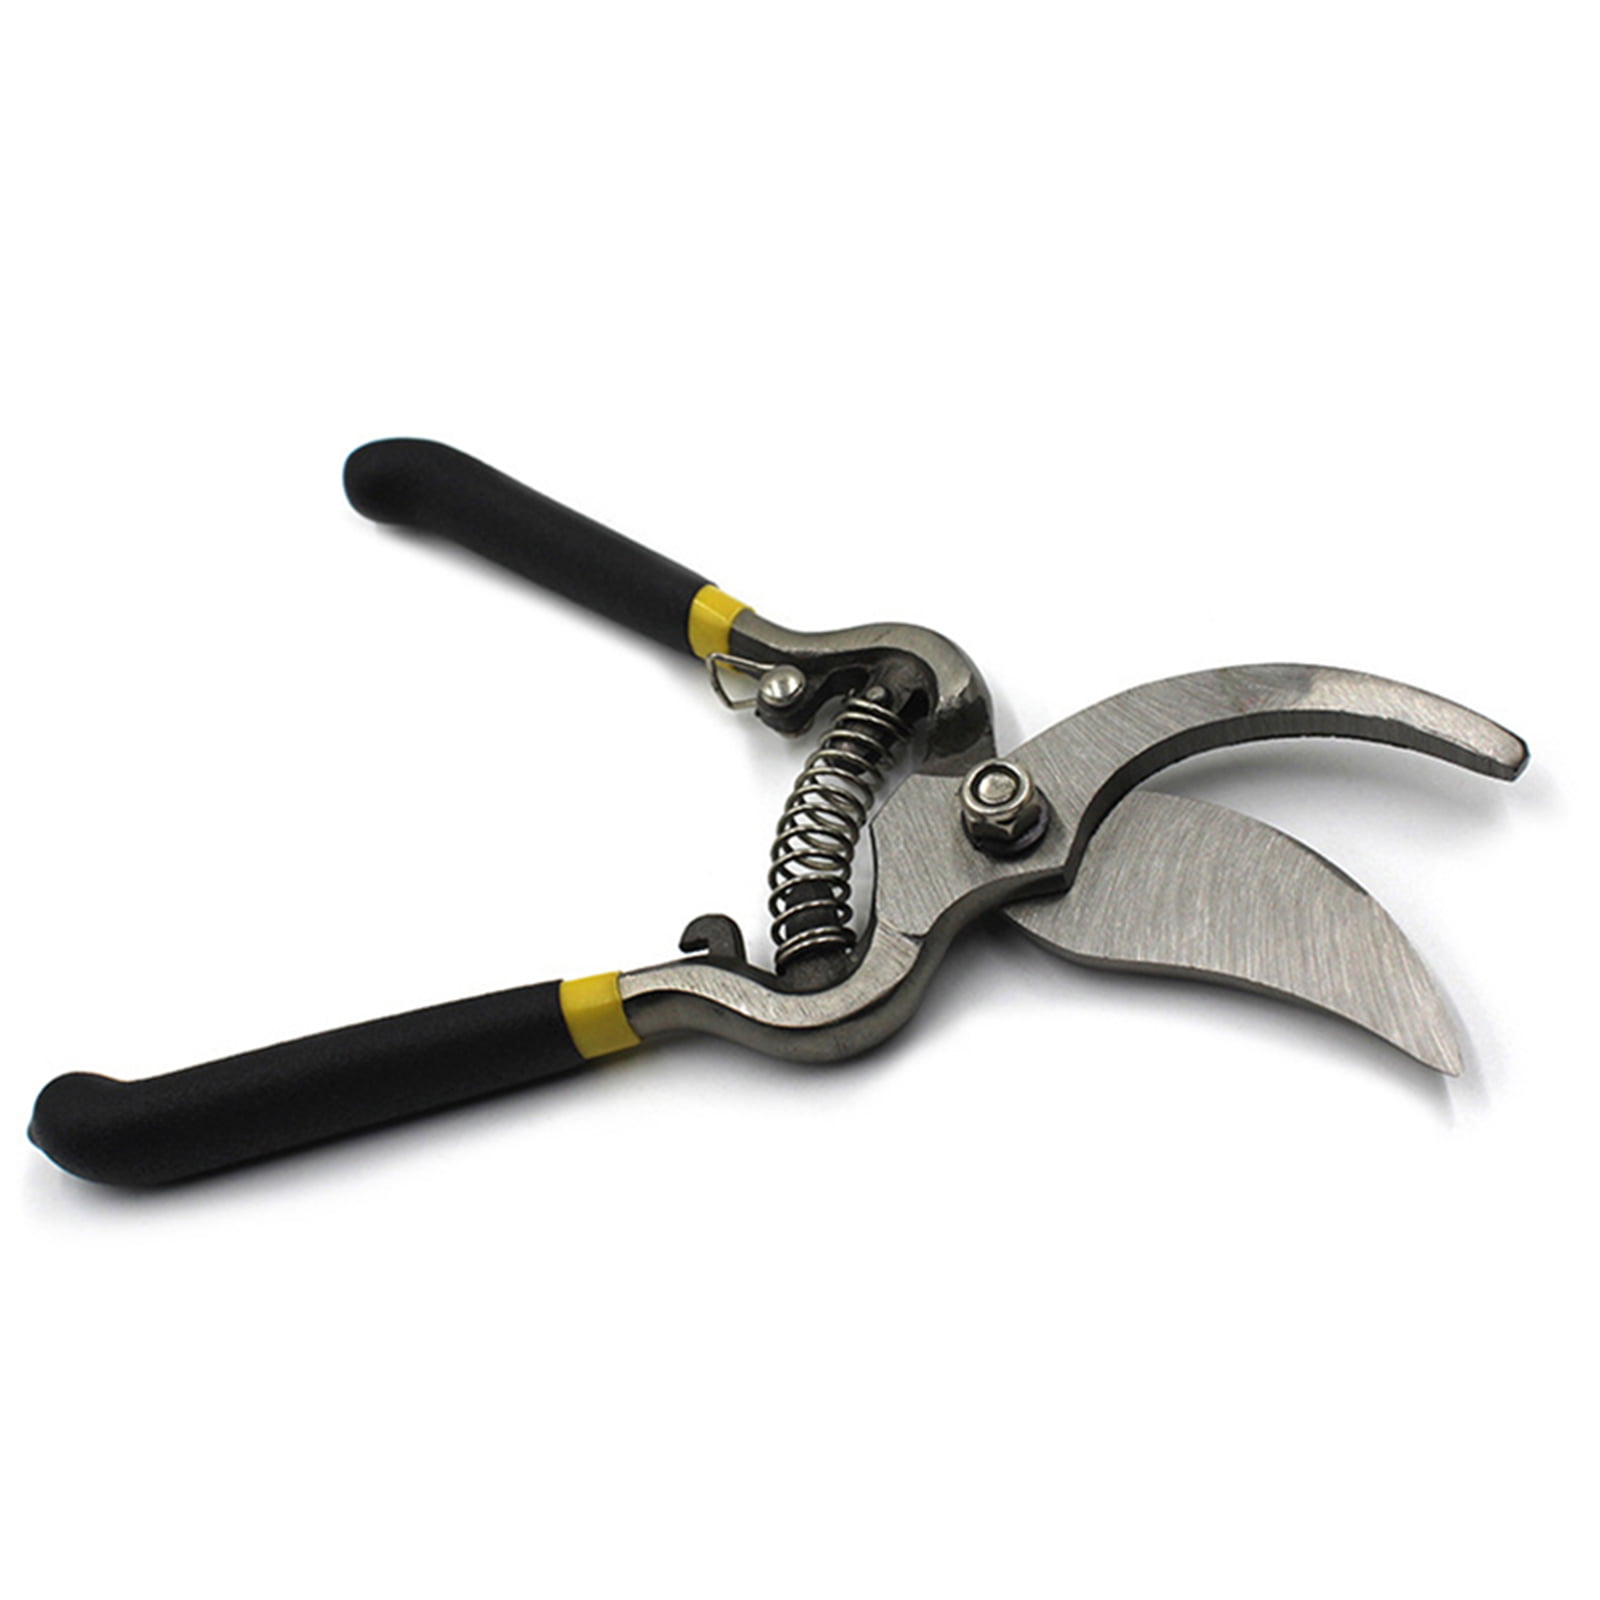 Details about   Gardening Pruning Branch Shear With Anti-slip Handle